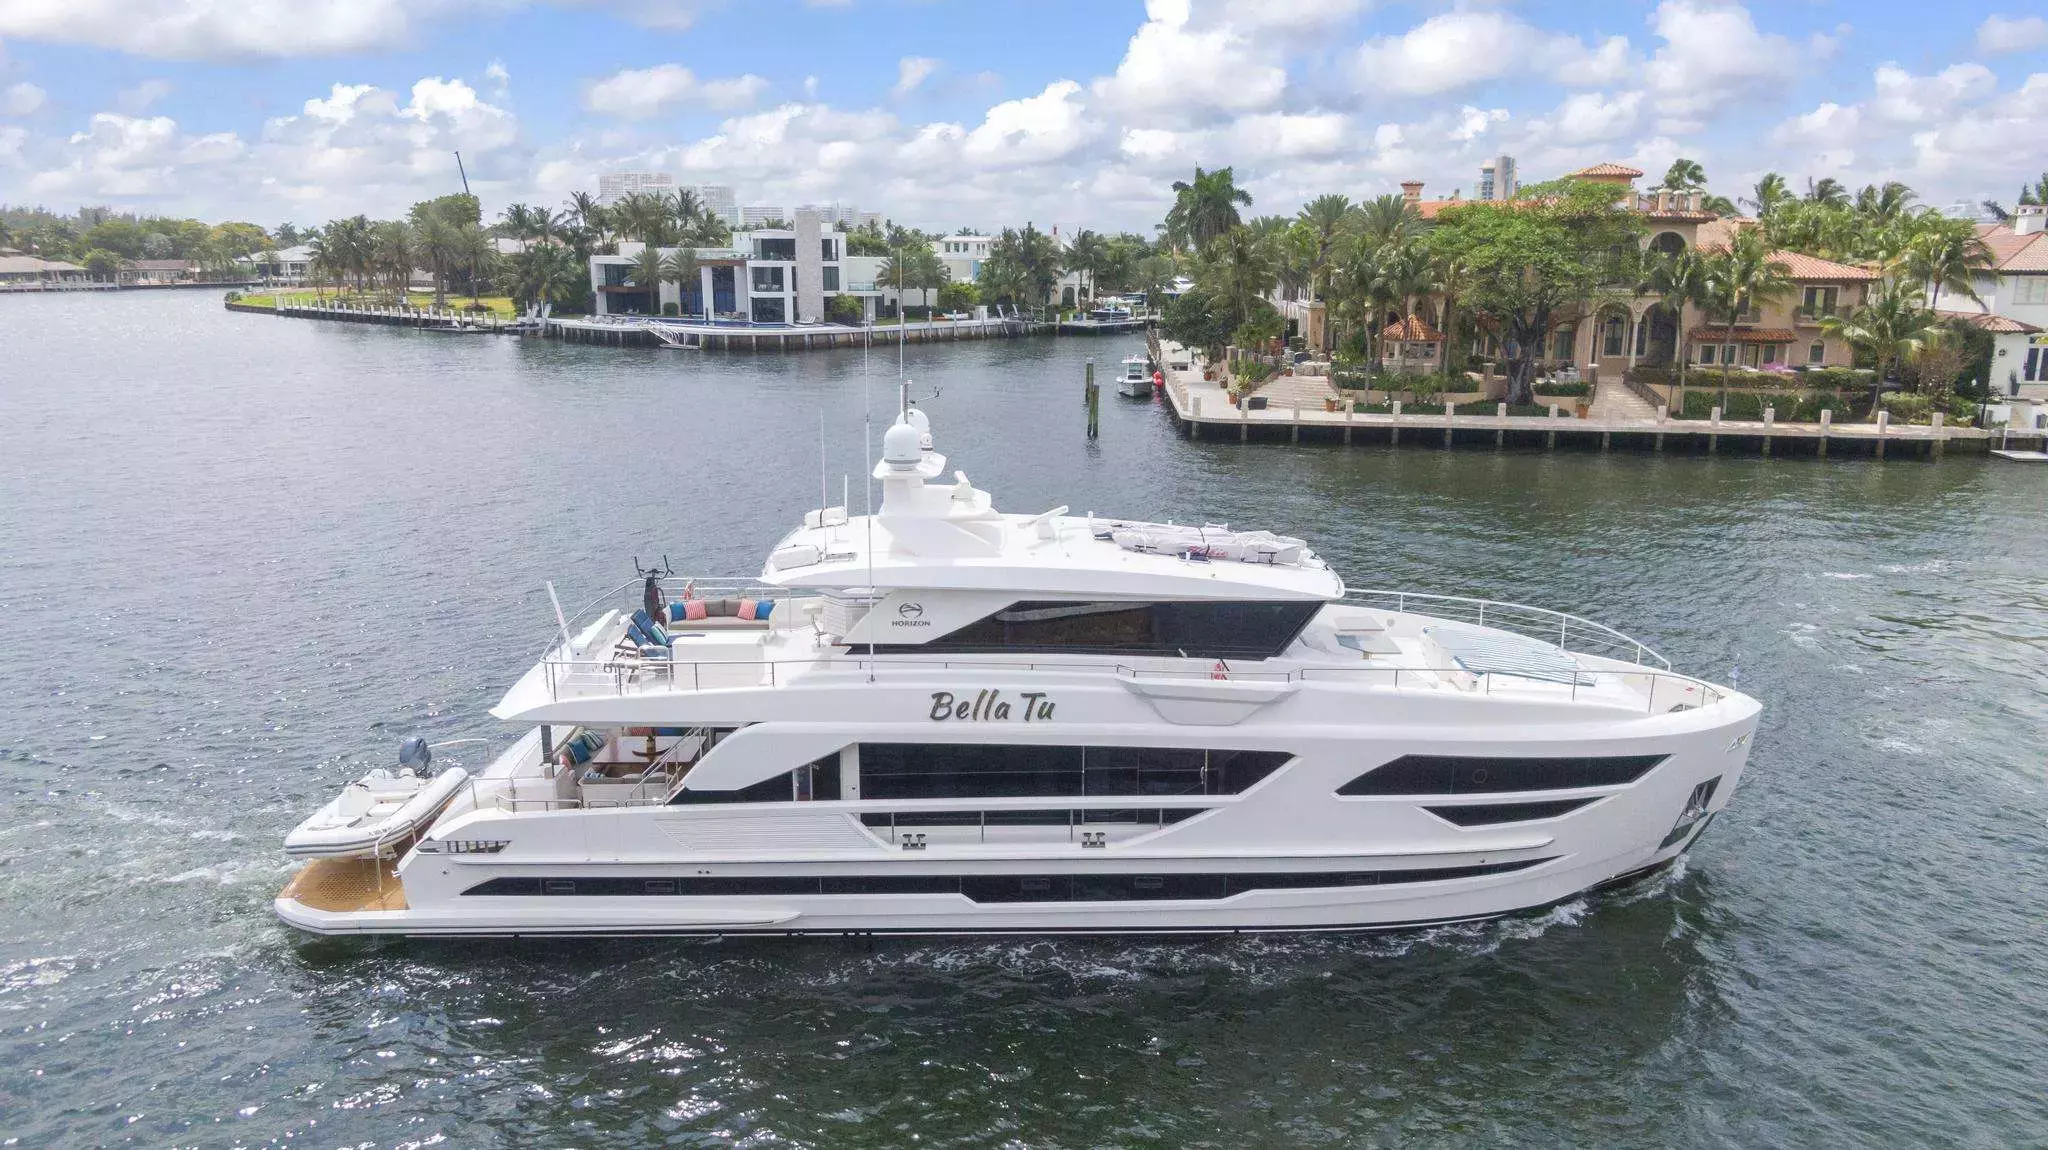 Bella Tu by Horizon - Top rates for a Charter of a private Motor Yacht in Florida USA